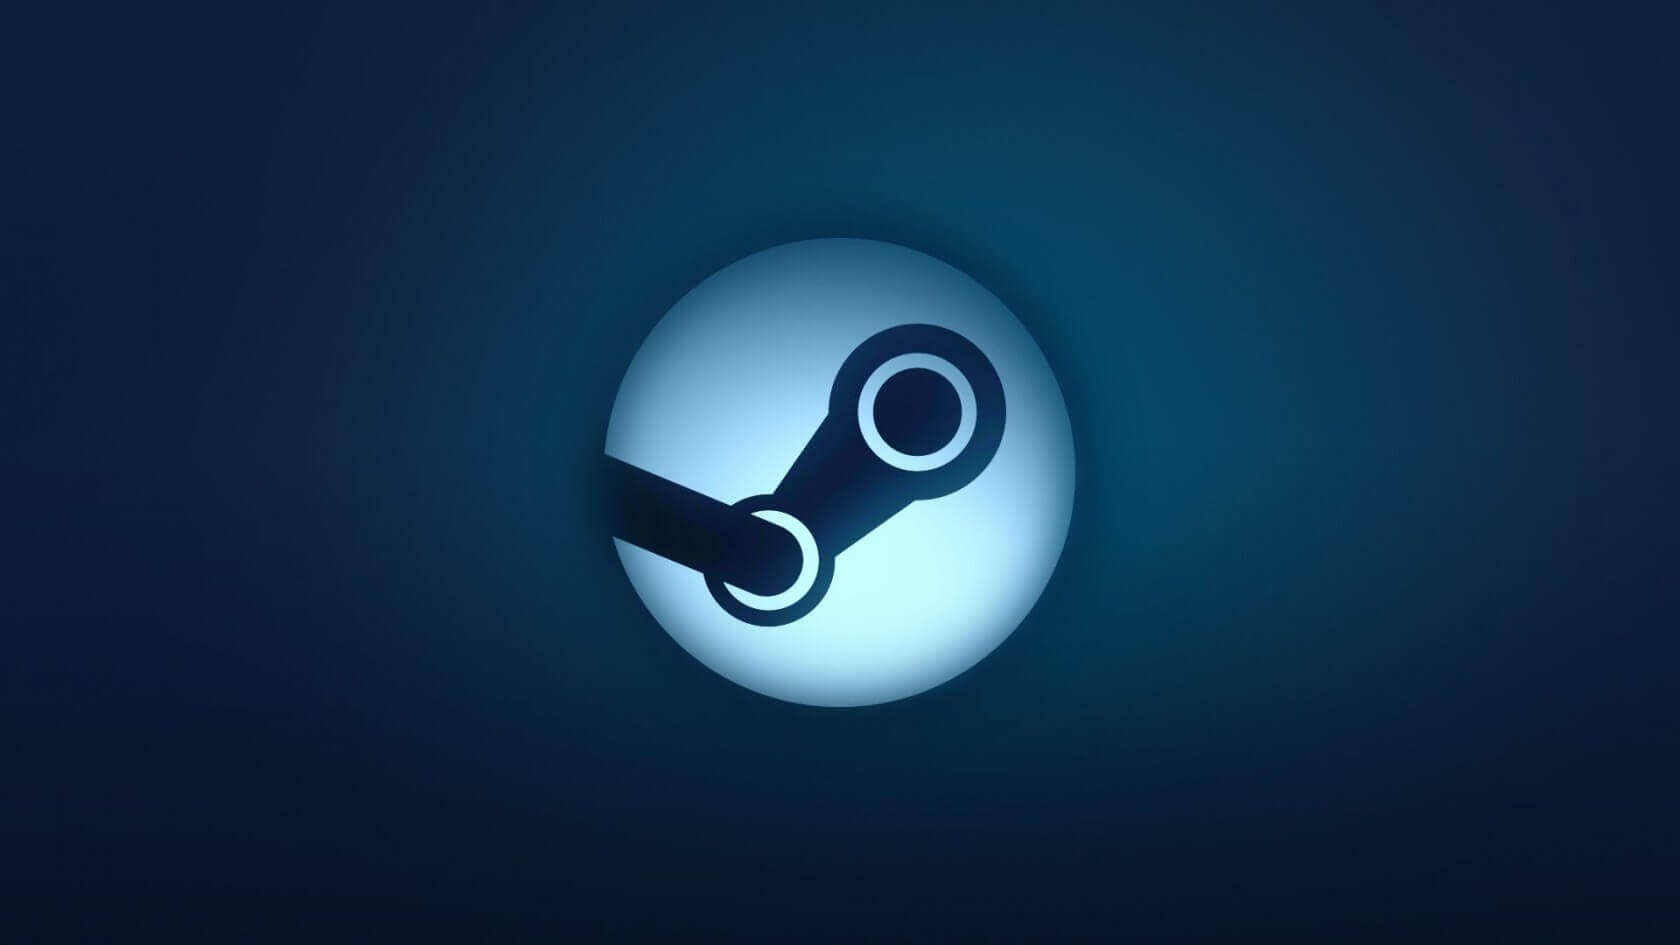 Steam survey returns to normal as AMD, Windows 11, and English recapture lost share, RTX 3060 (just) stays on top